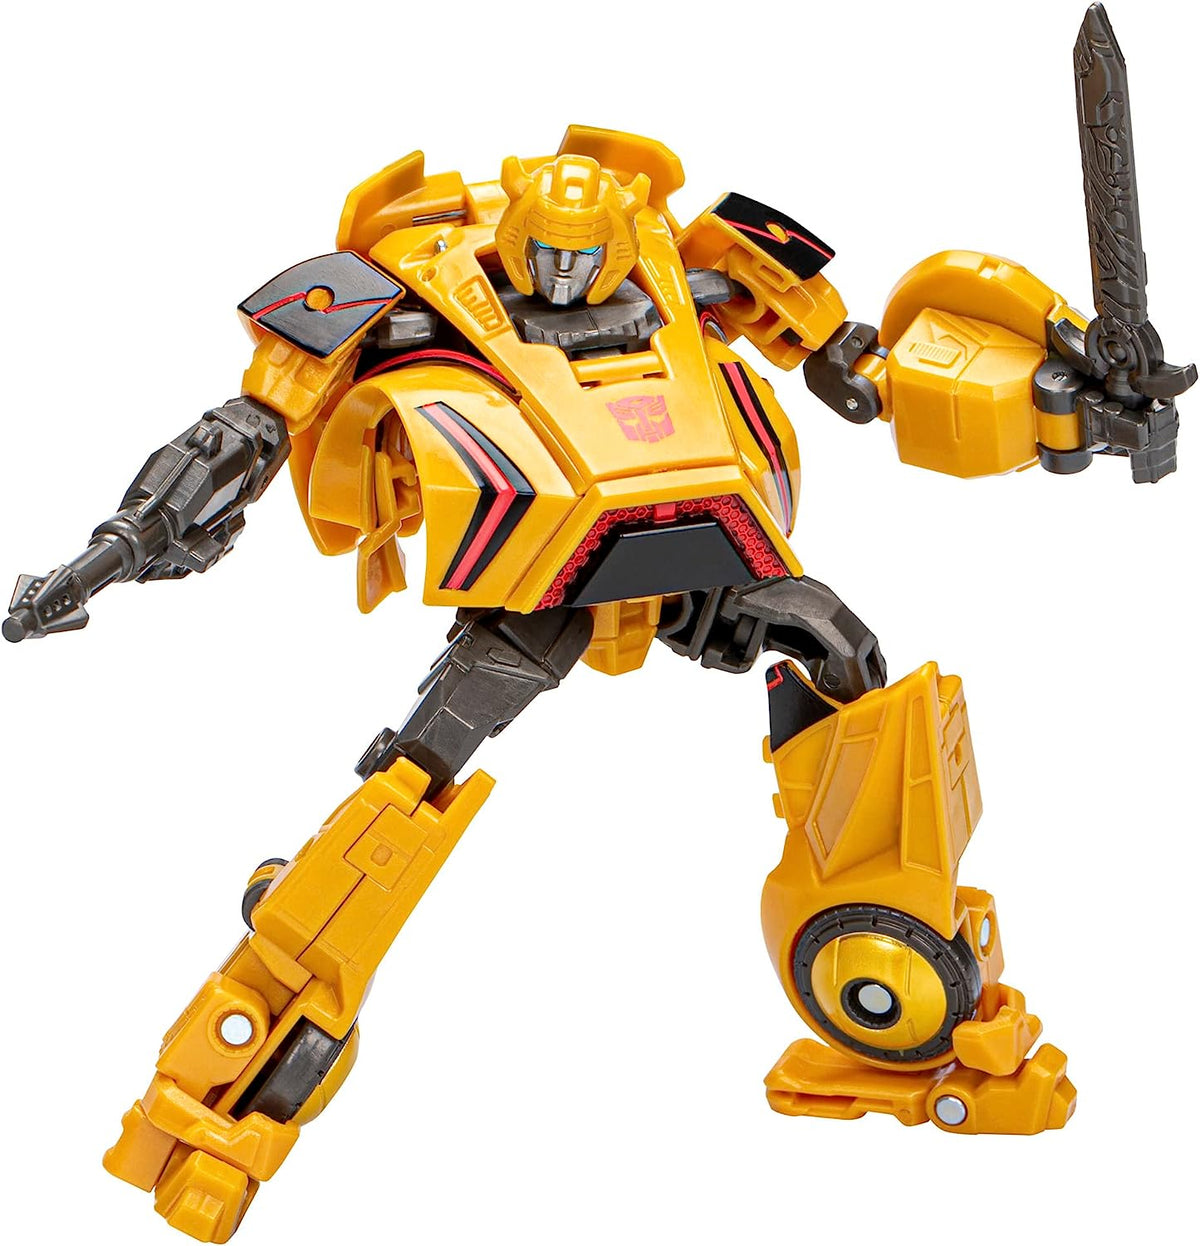 Transformers Toys Studio Series Deluxe Class 01 Gamer Edition Bumblebee Toy